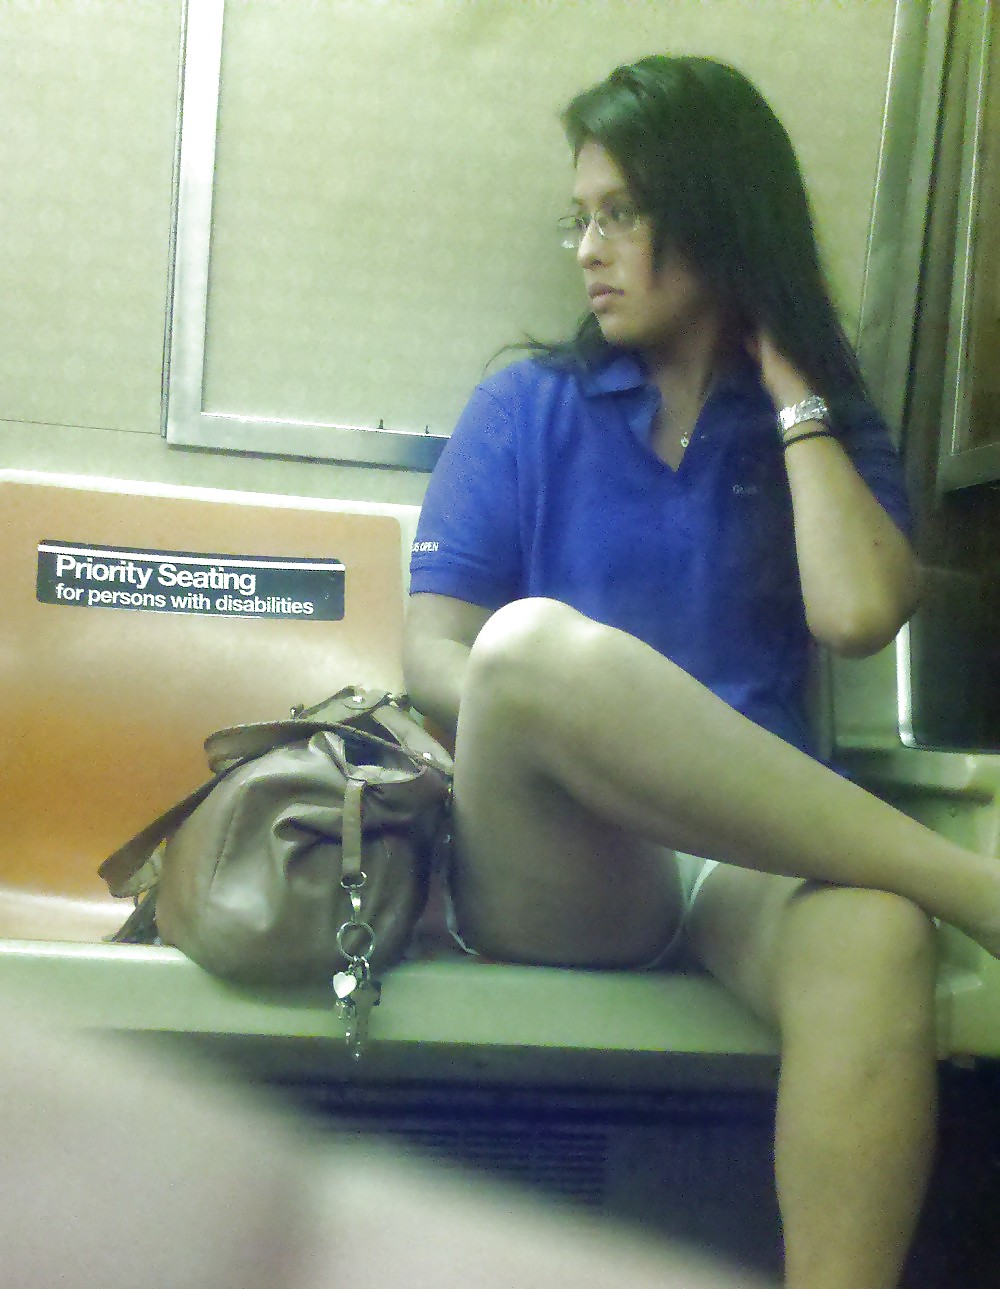 New York Subway Girls Compilation 1 - Legs and Thighs #6590234